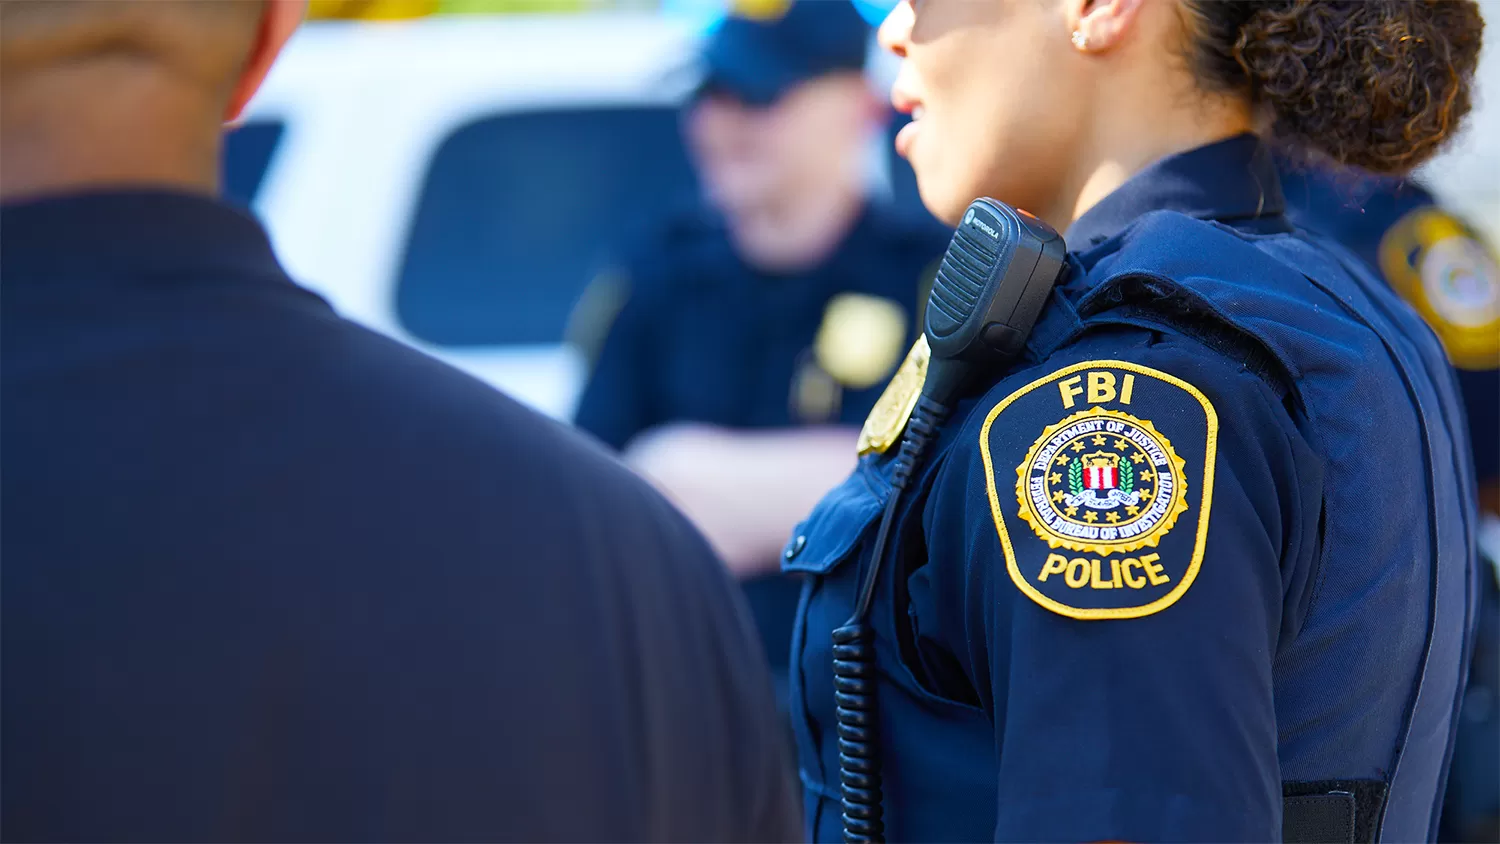 A zoomed in visual of the FBI police officer seal on their uniforms